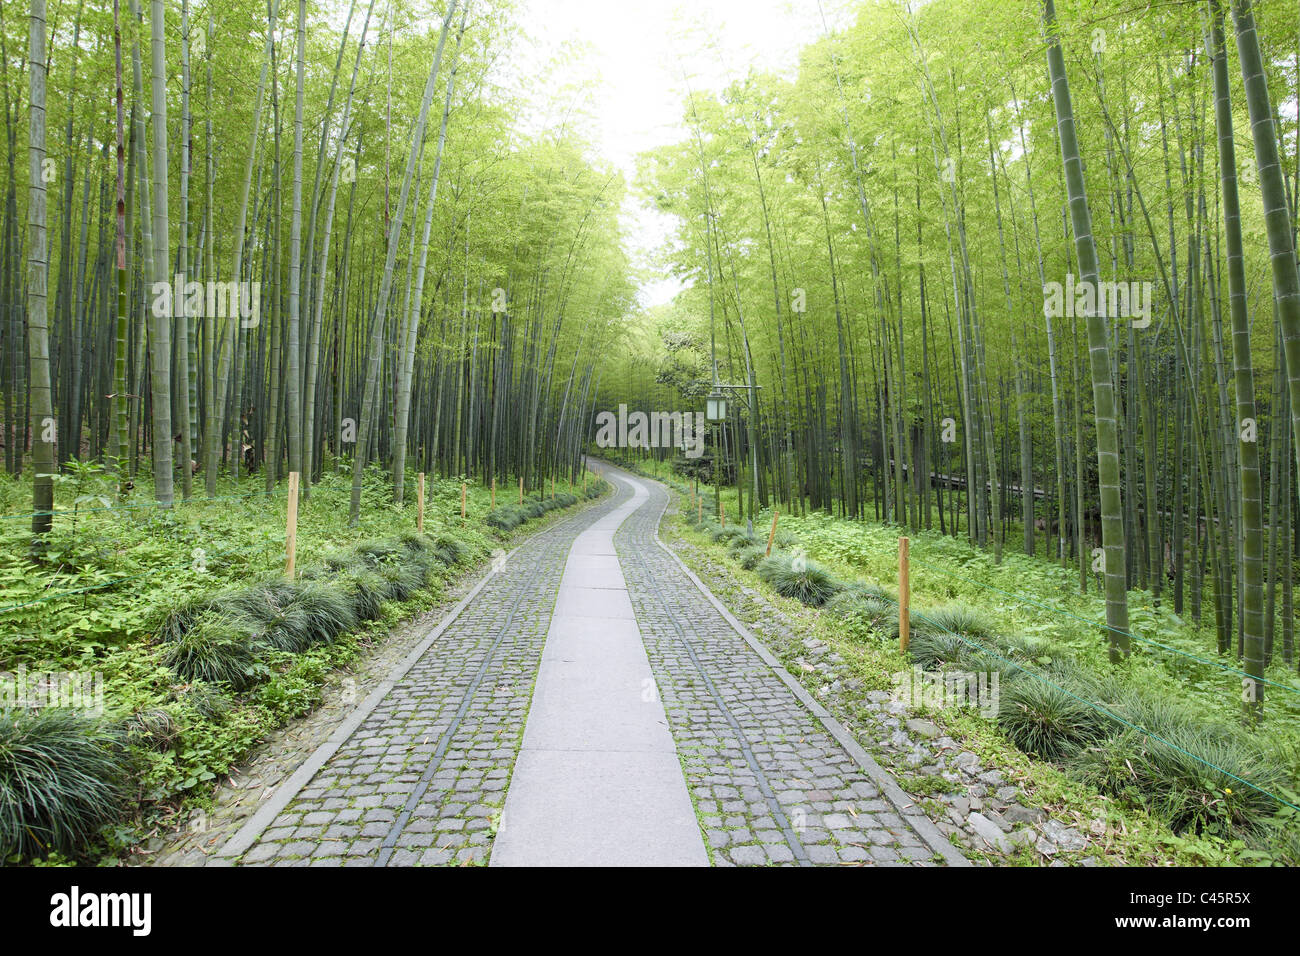 Green Bamboo Forest -A path leads through a lush bamboo forest. Stock Photo